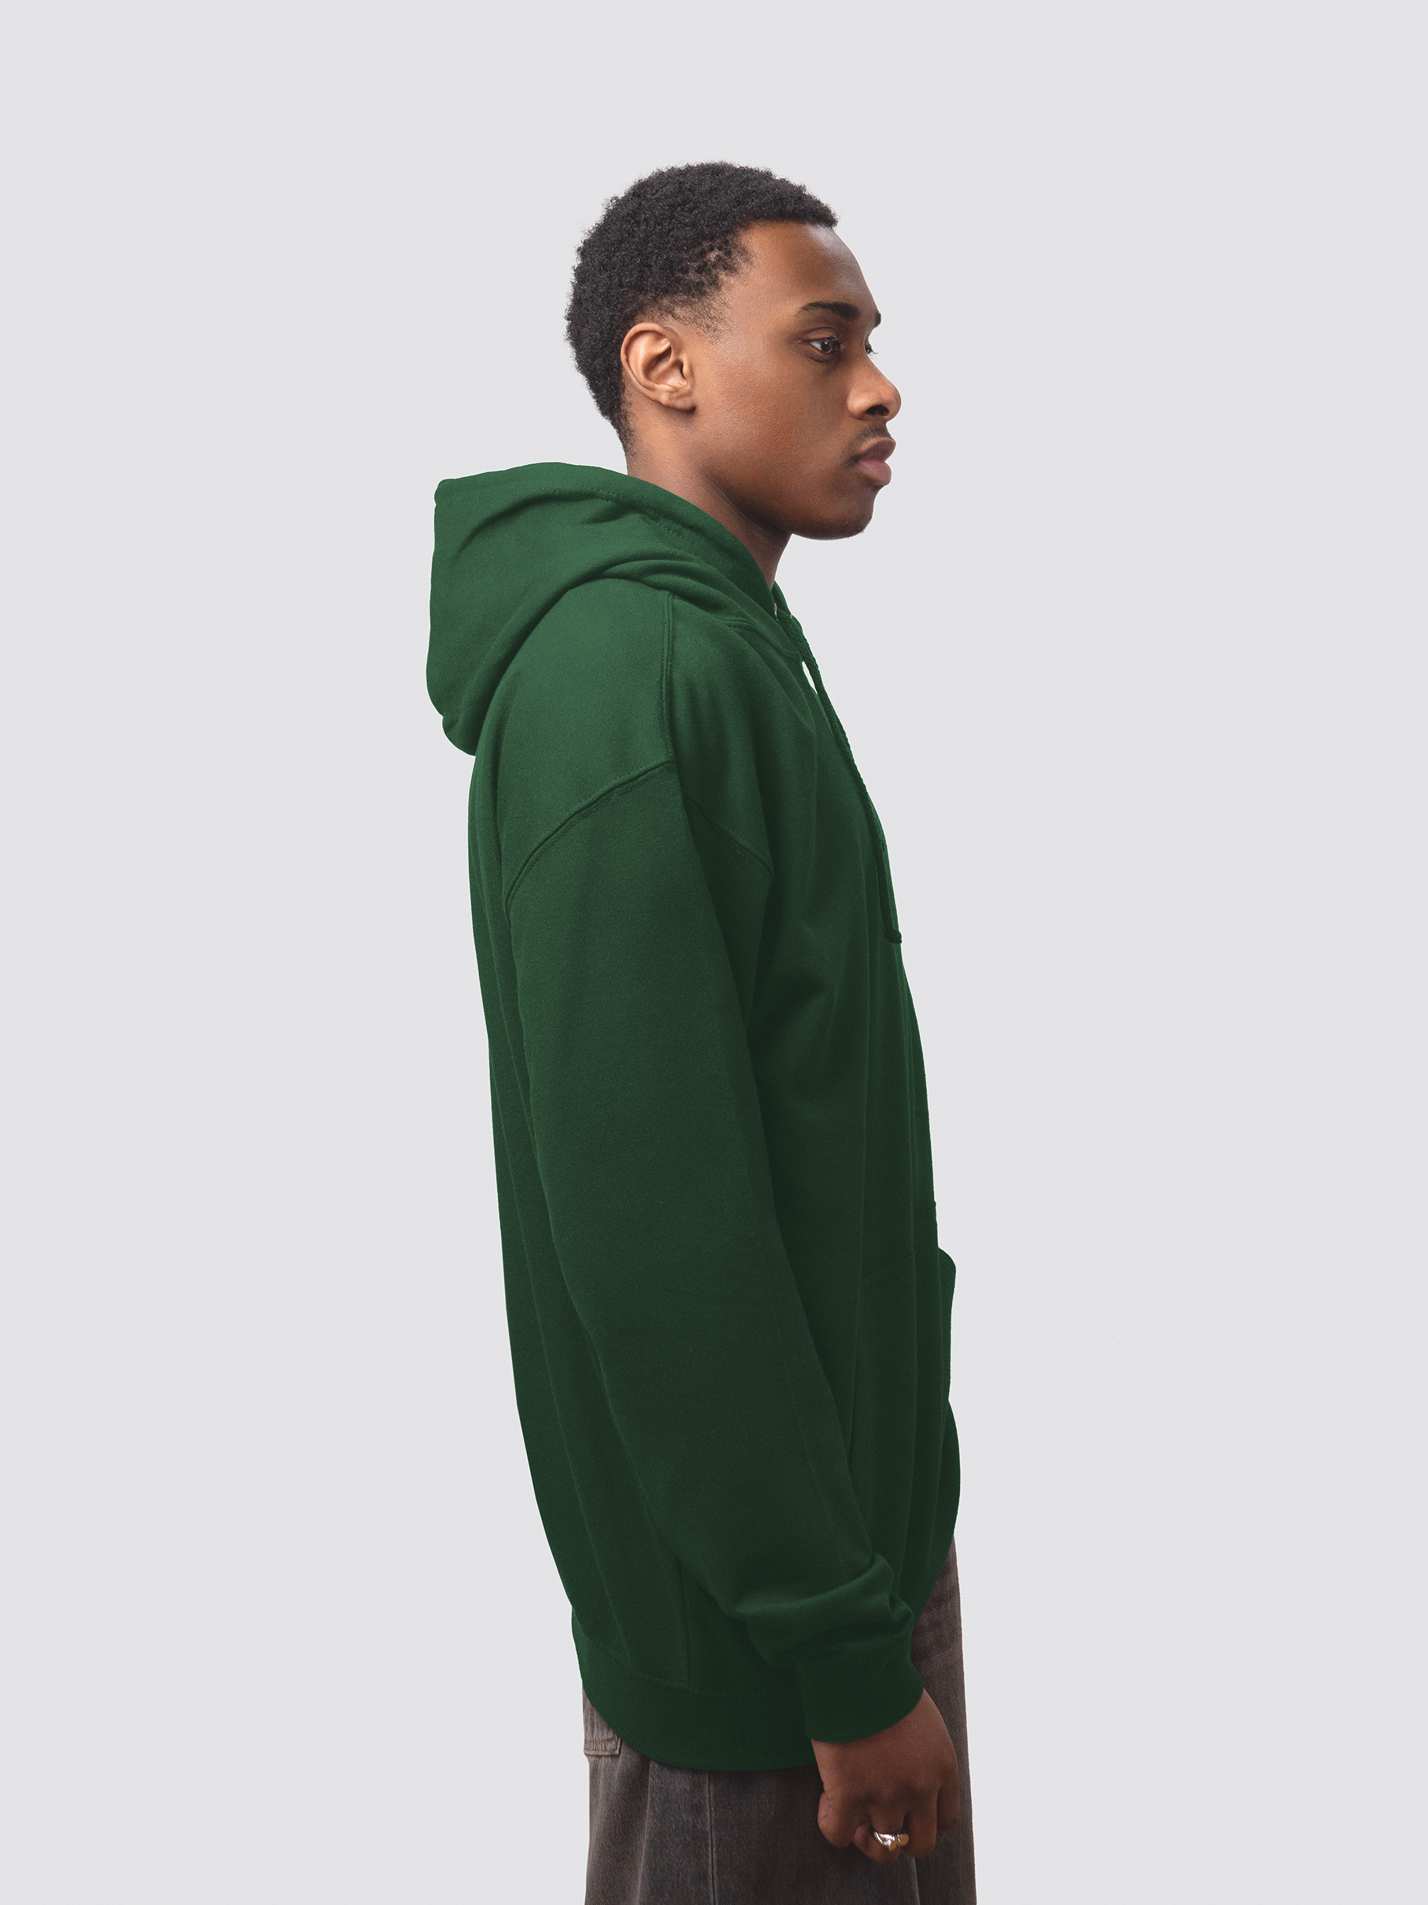 The side of a bottle green hoodie, worn by a male student model